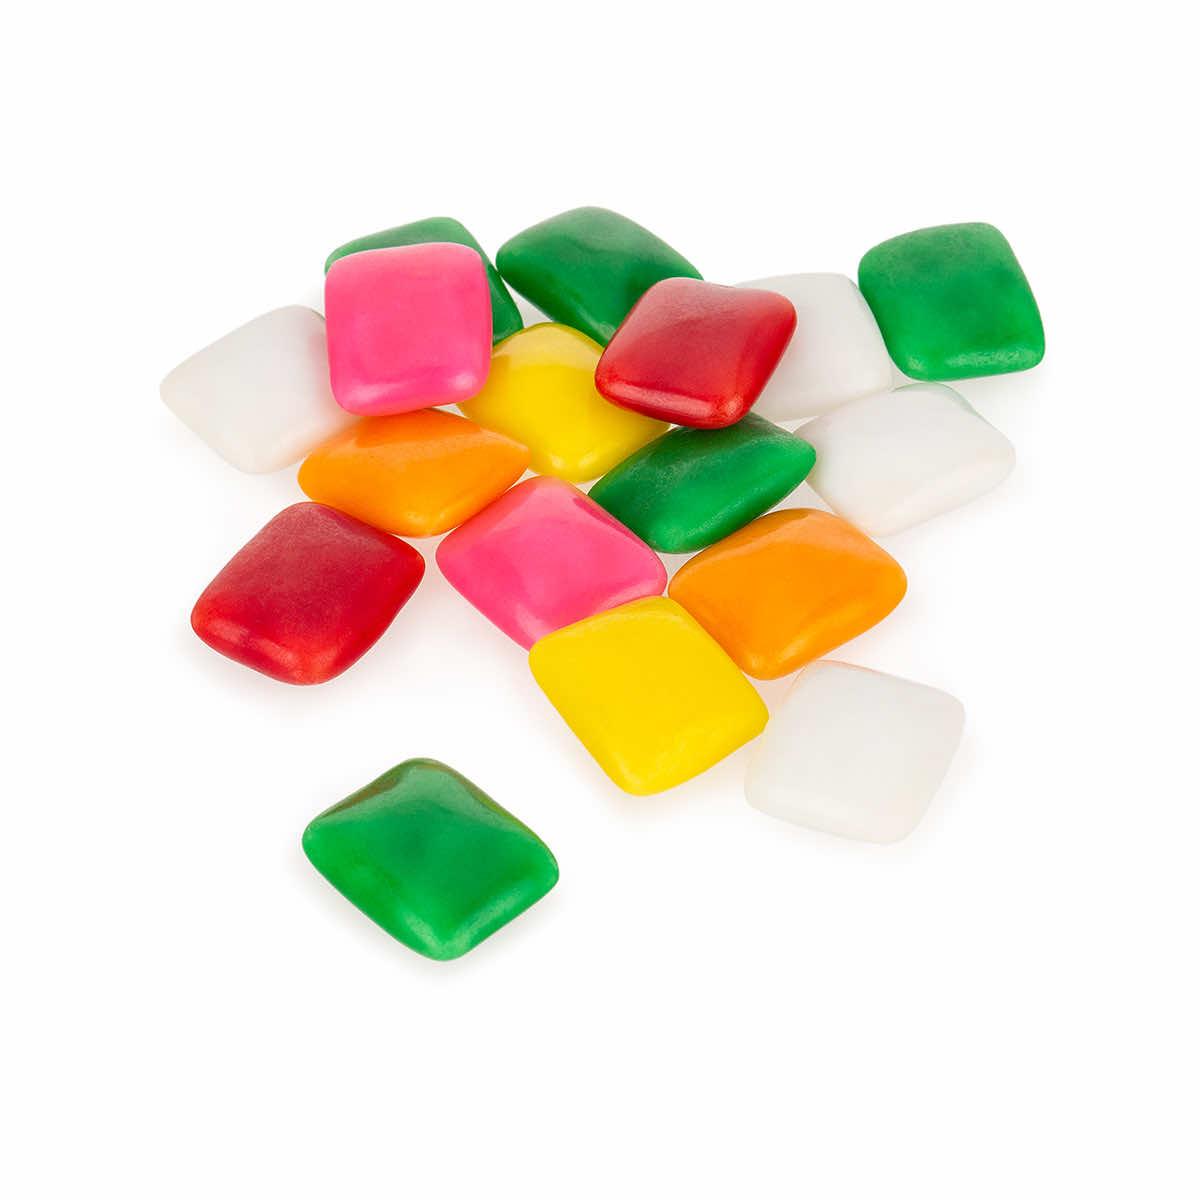 Assorted Charms Hard Candies - Candy Blog